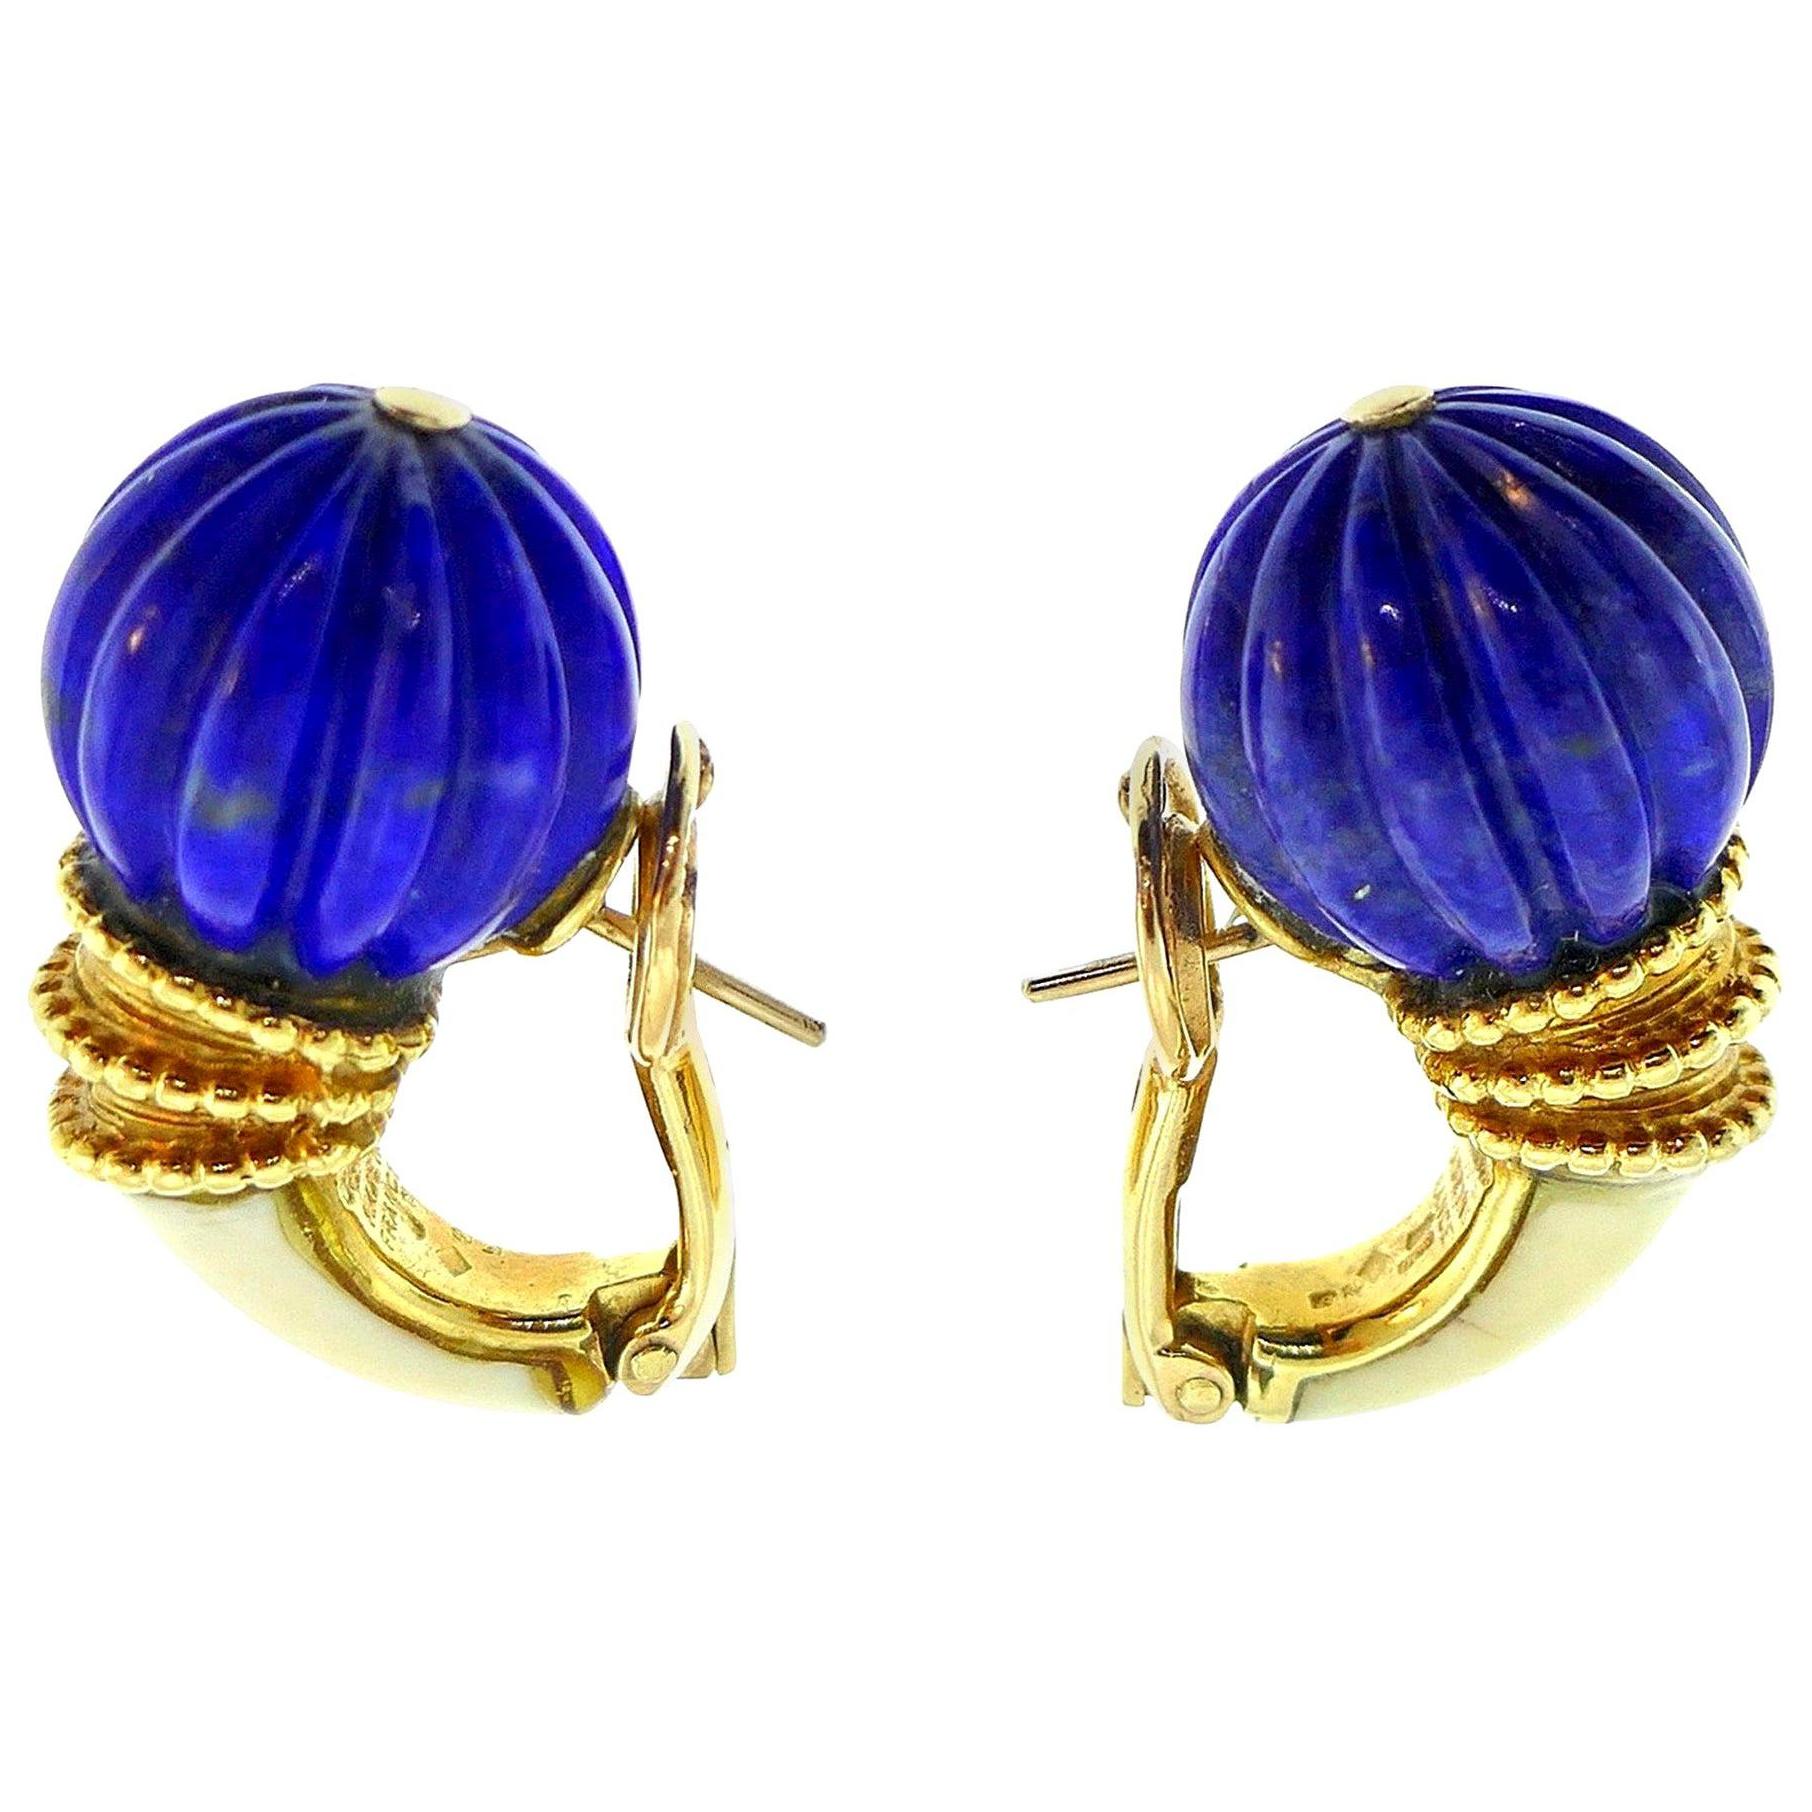 Vintage (c. 1970s) 18k yellow gold and carved lapis earrings by Boucheron.  
Stamped with the Boucheron maker's mark, French marks and a hallmark for 18k gold. 
Measurements: heights is 1 1/8